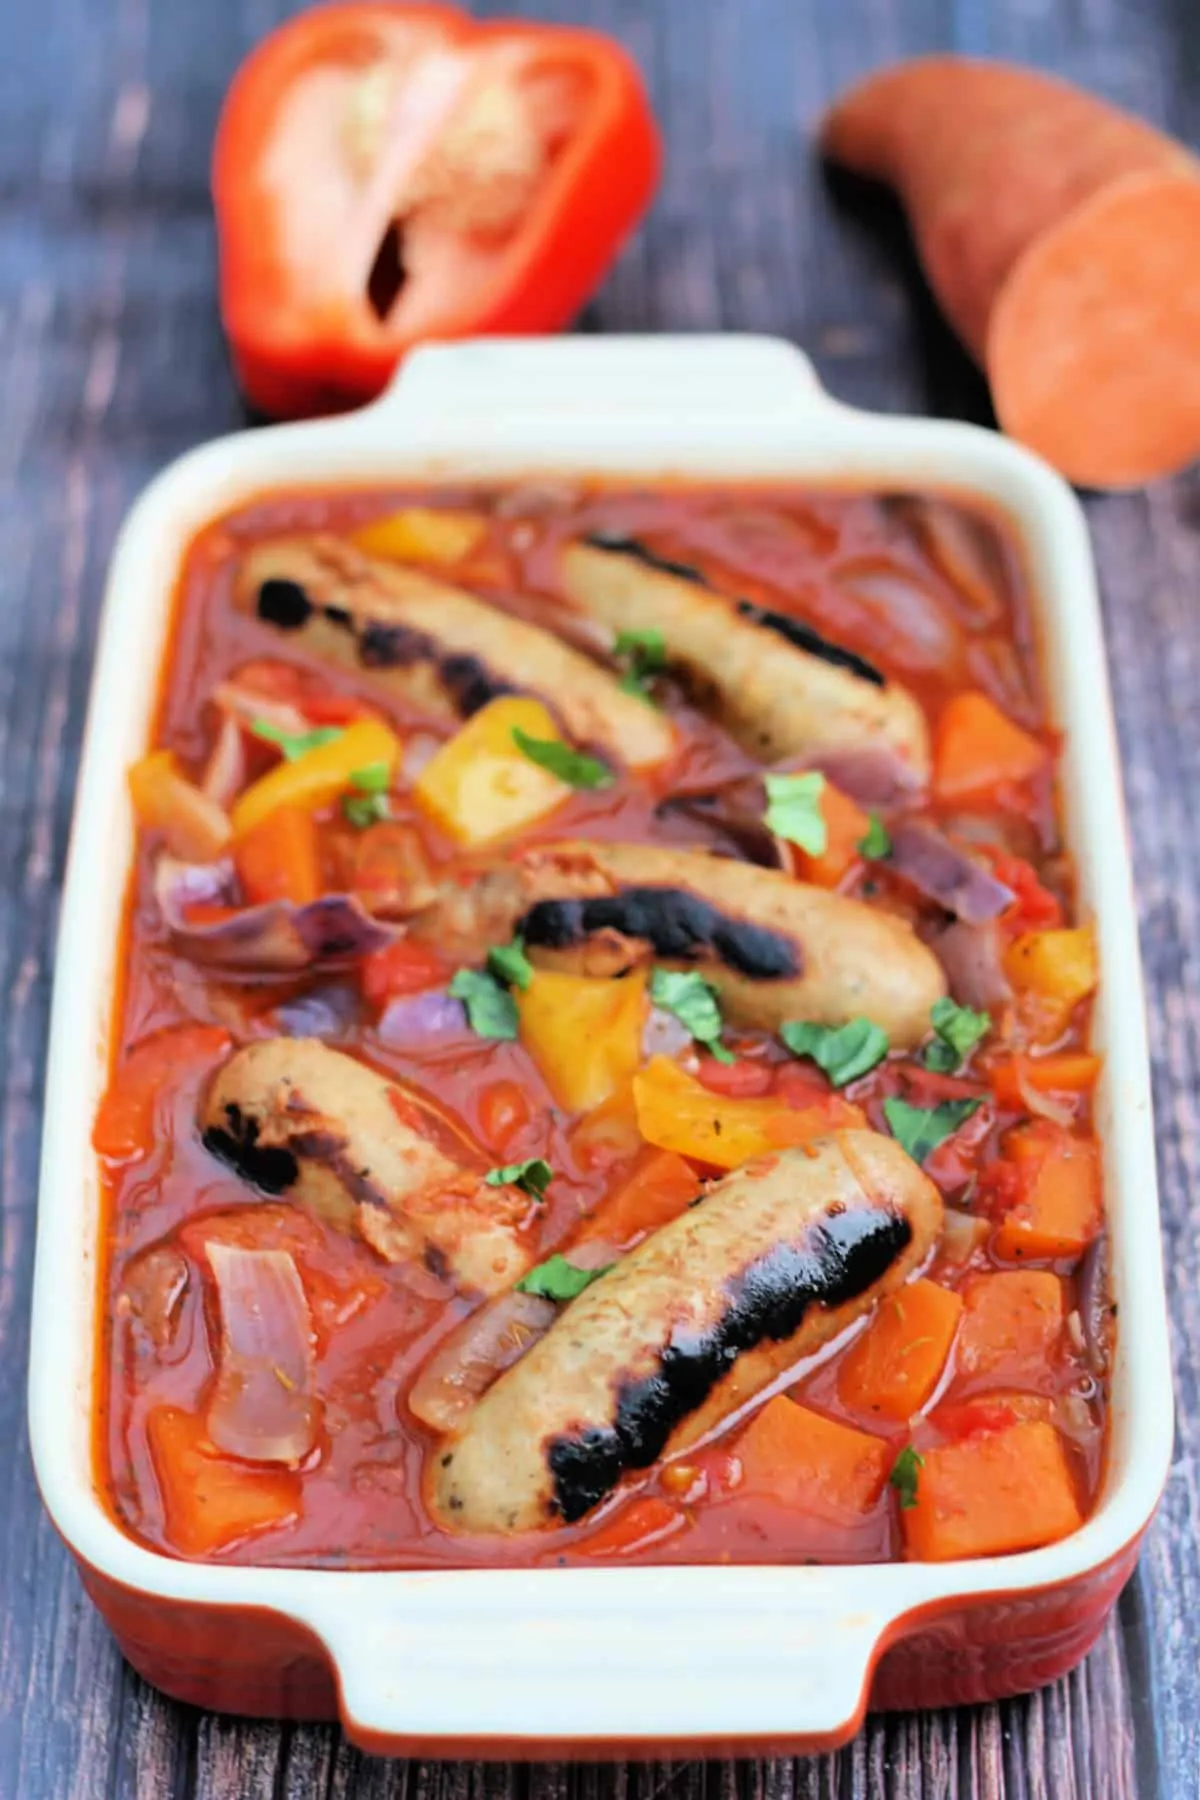 Sausage and vegetable casserole in a serving dish on a wooden background.